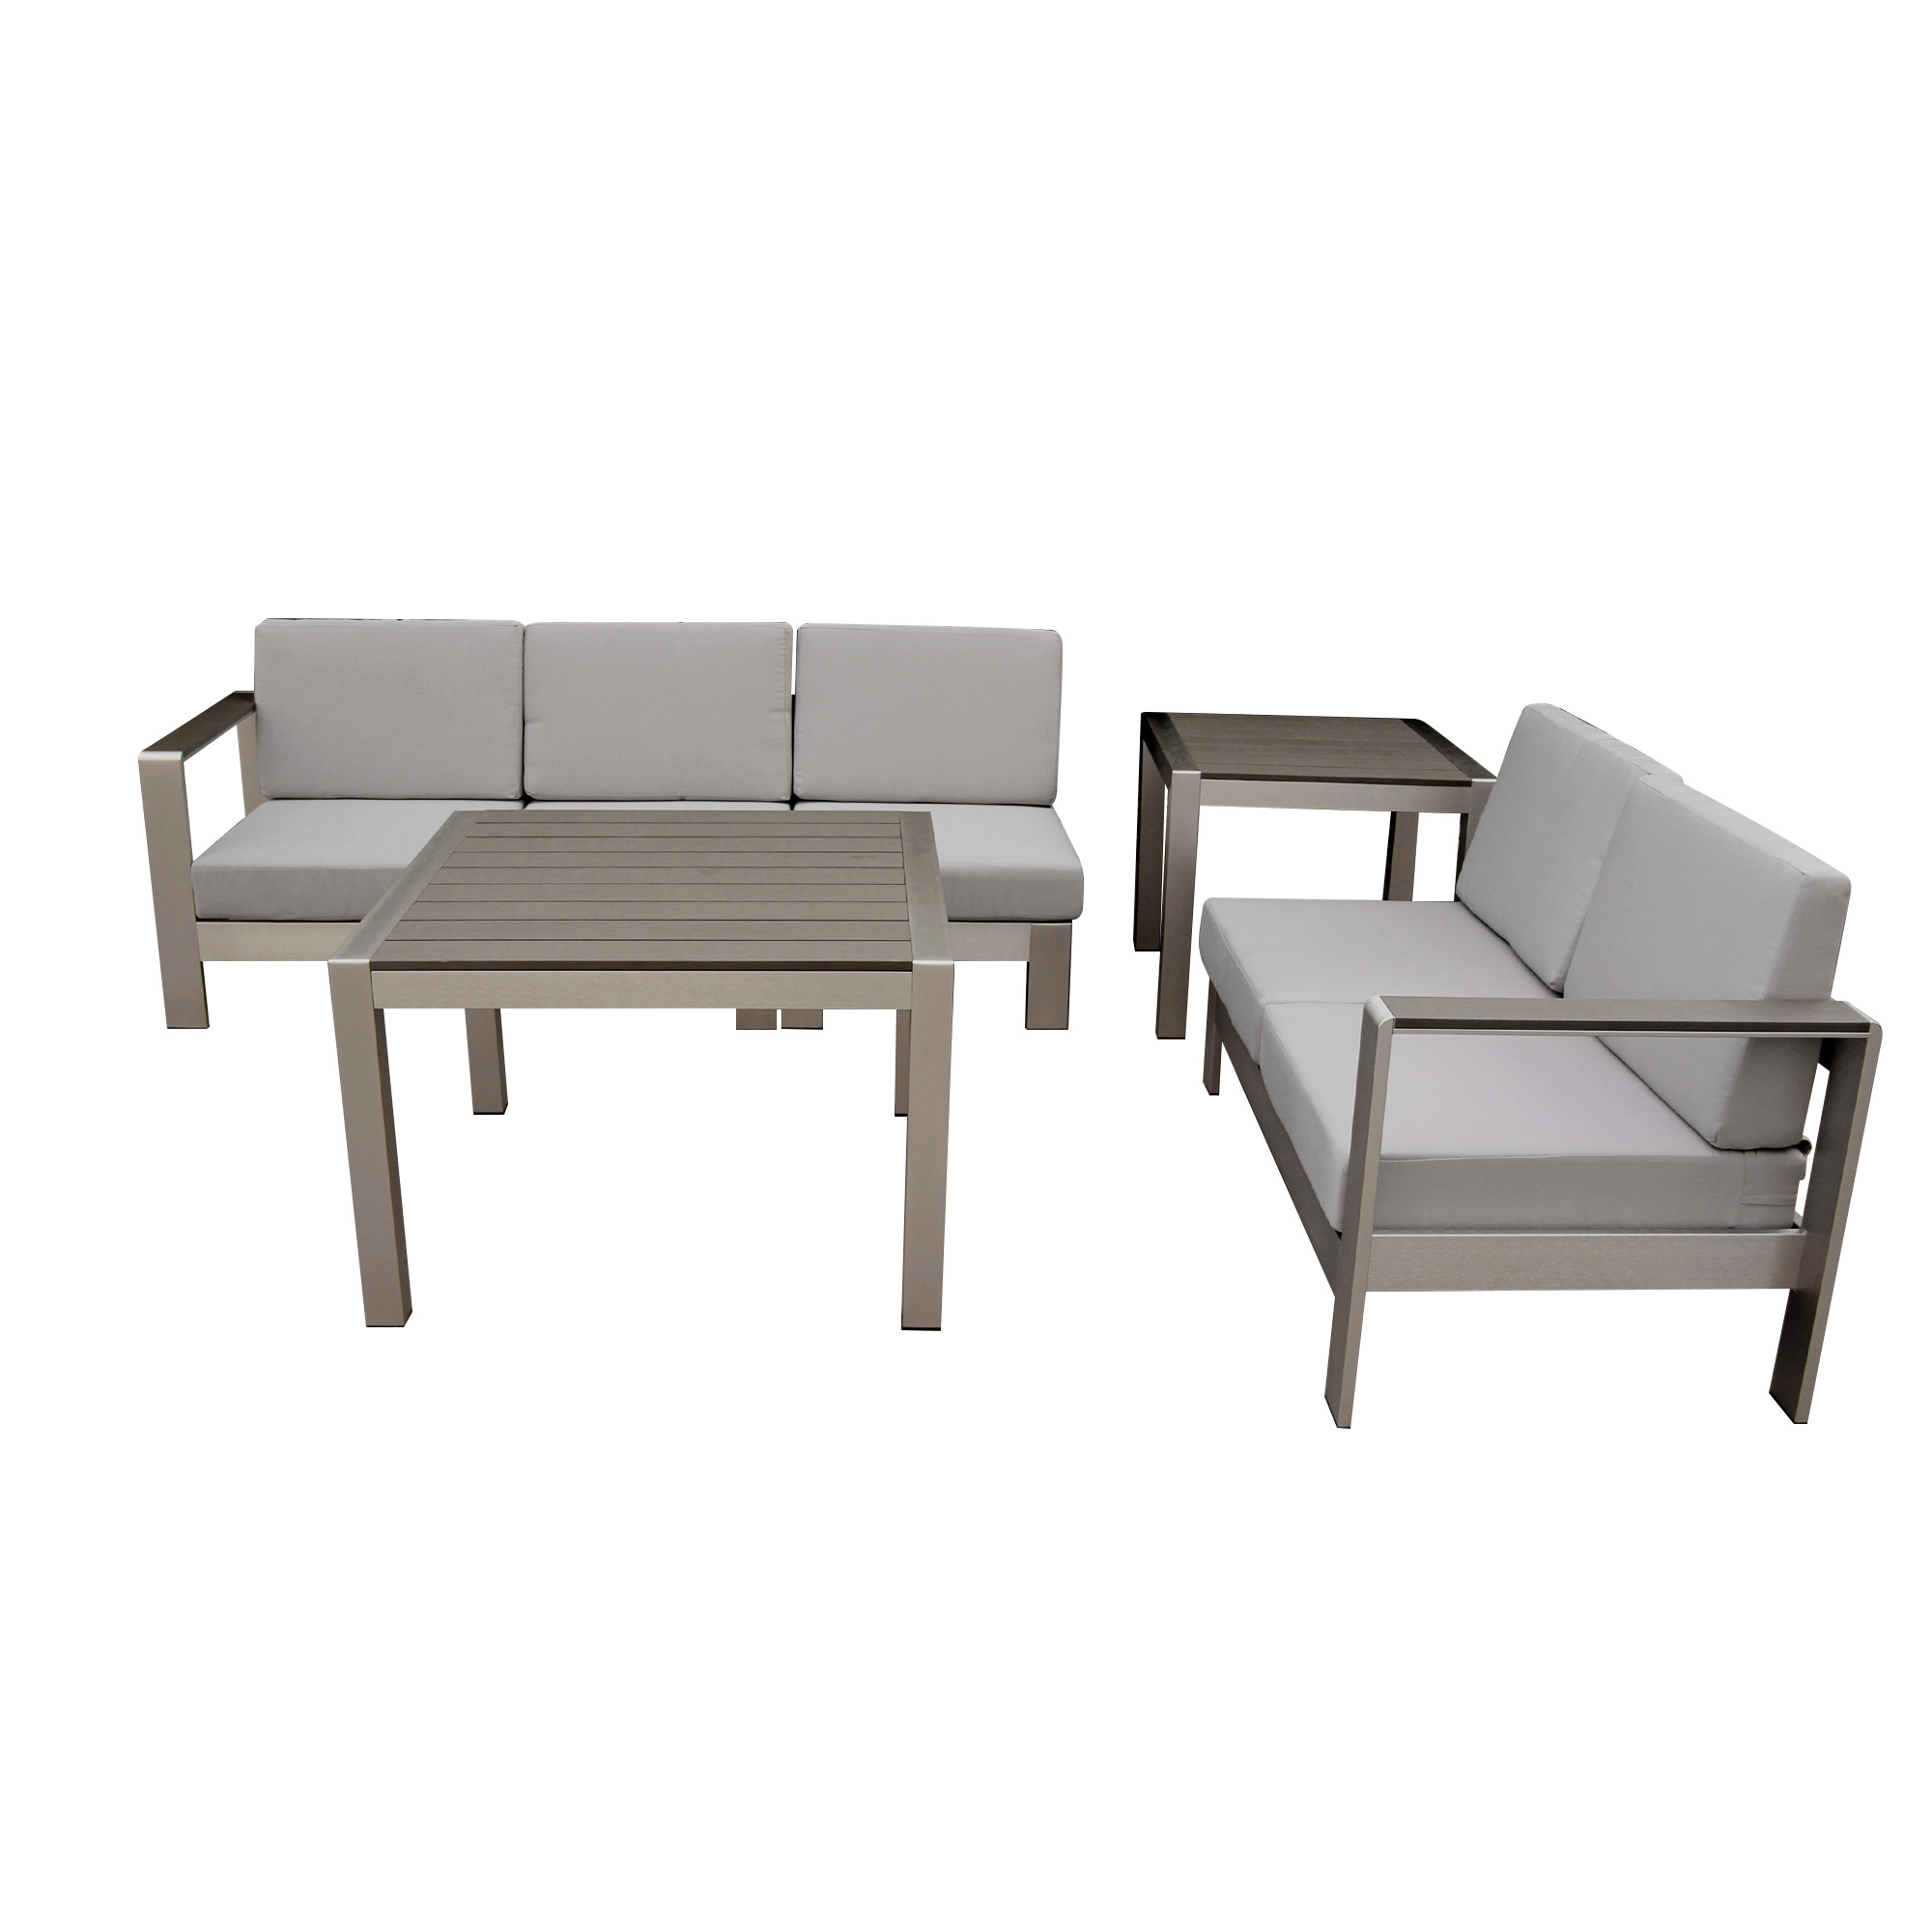 Hot Item Modern Good Quality Garden Outdoor Patio Furniture Different Combination Sofa Coffee Table With Plastic Wood Top Sofa Set within sizing 2000 X 2000